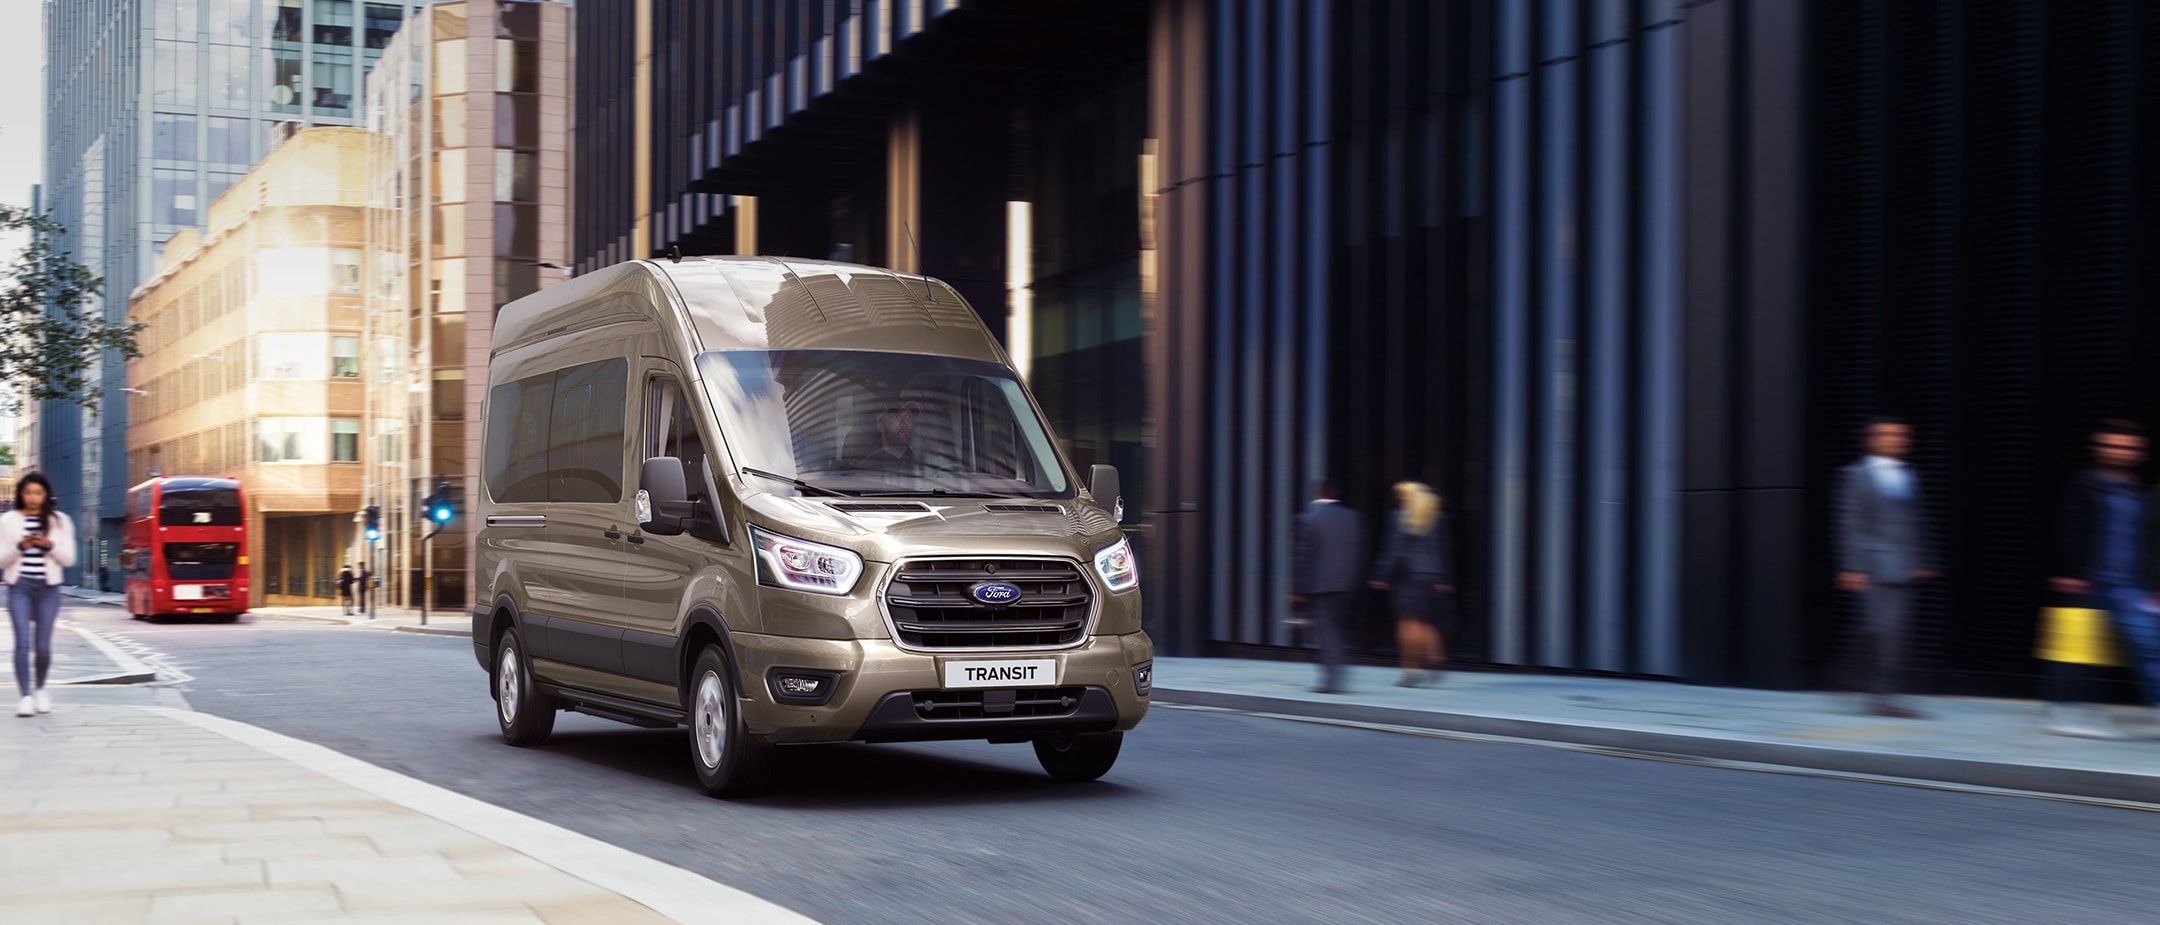 Ford Transit Minibus driving in London front view